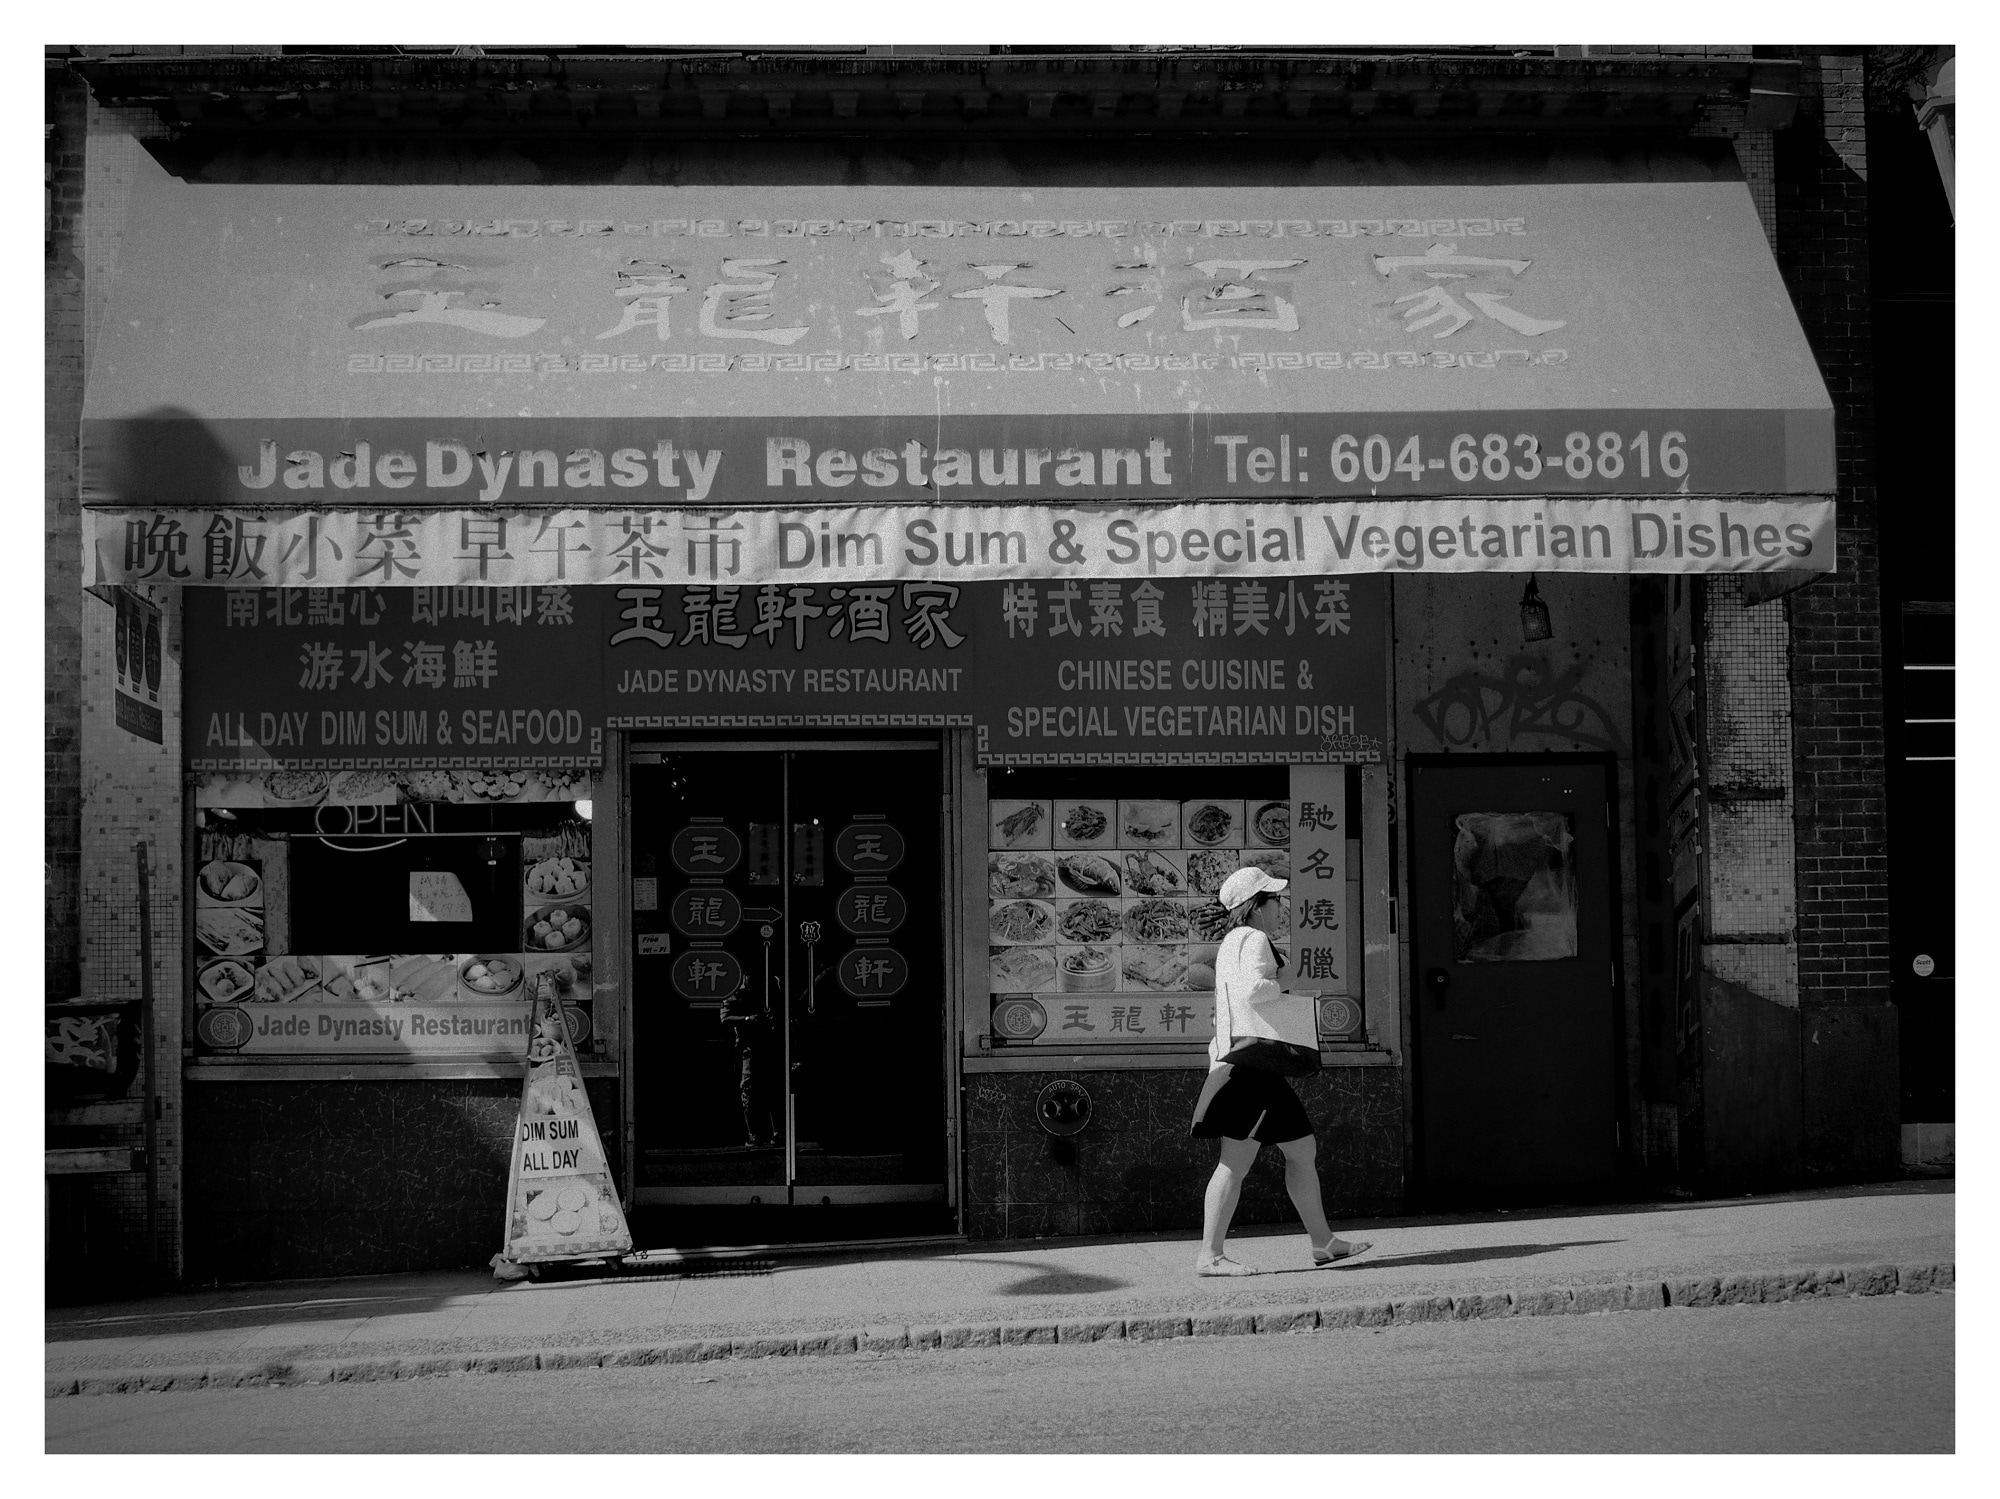 Chinatown Vancouver Black And White White Photography Restaurant Advertising Black 525072 Pxhere.com